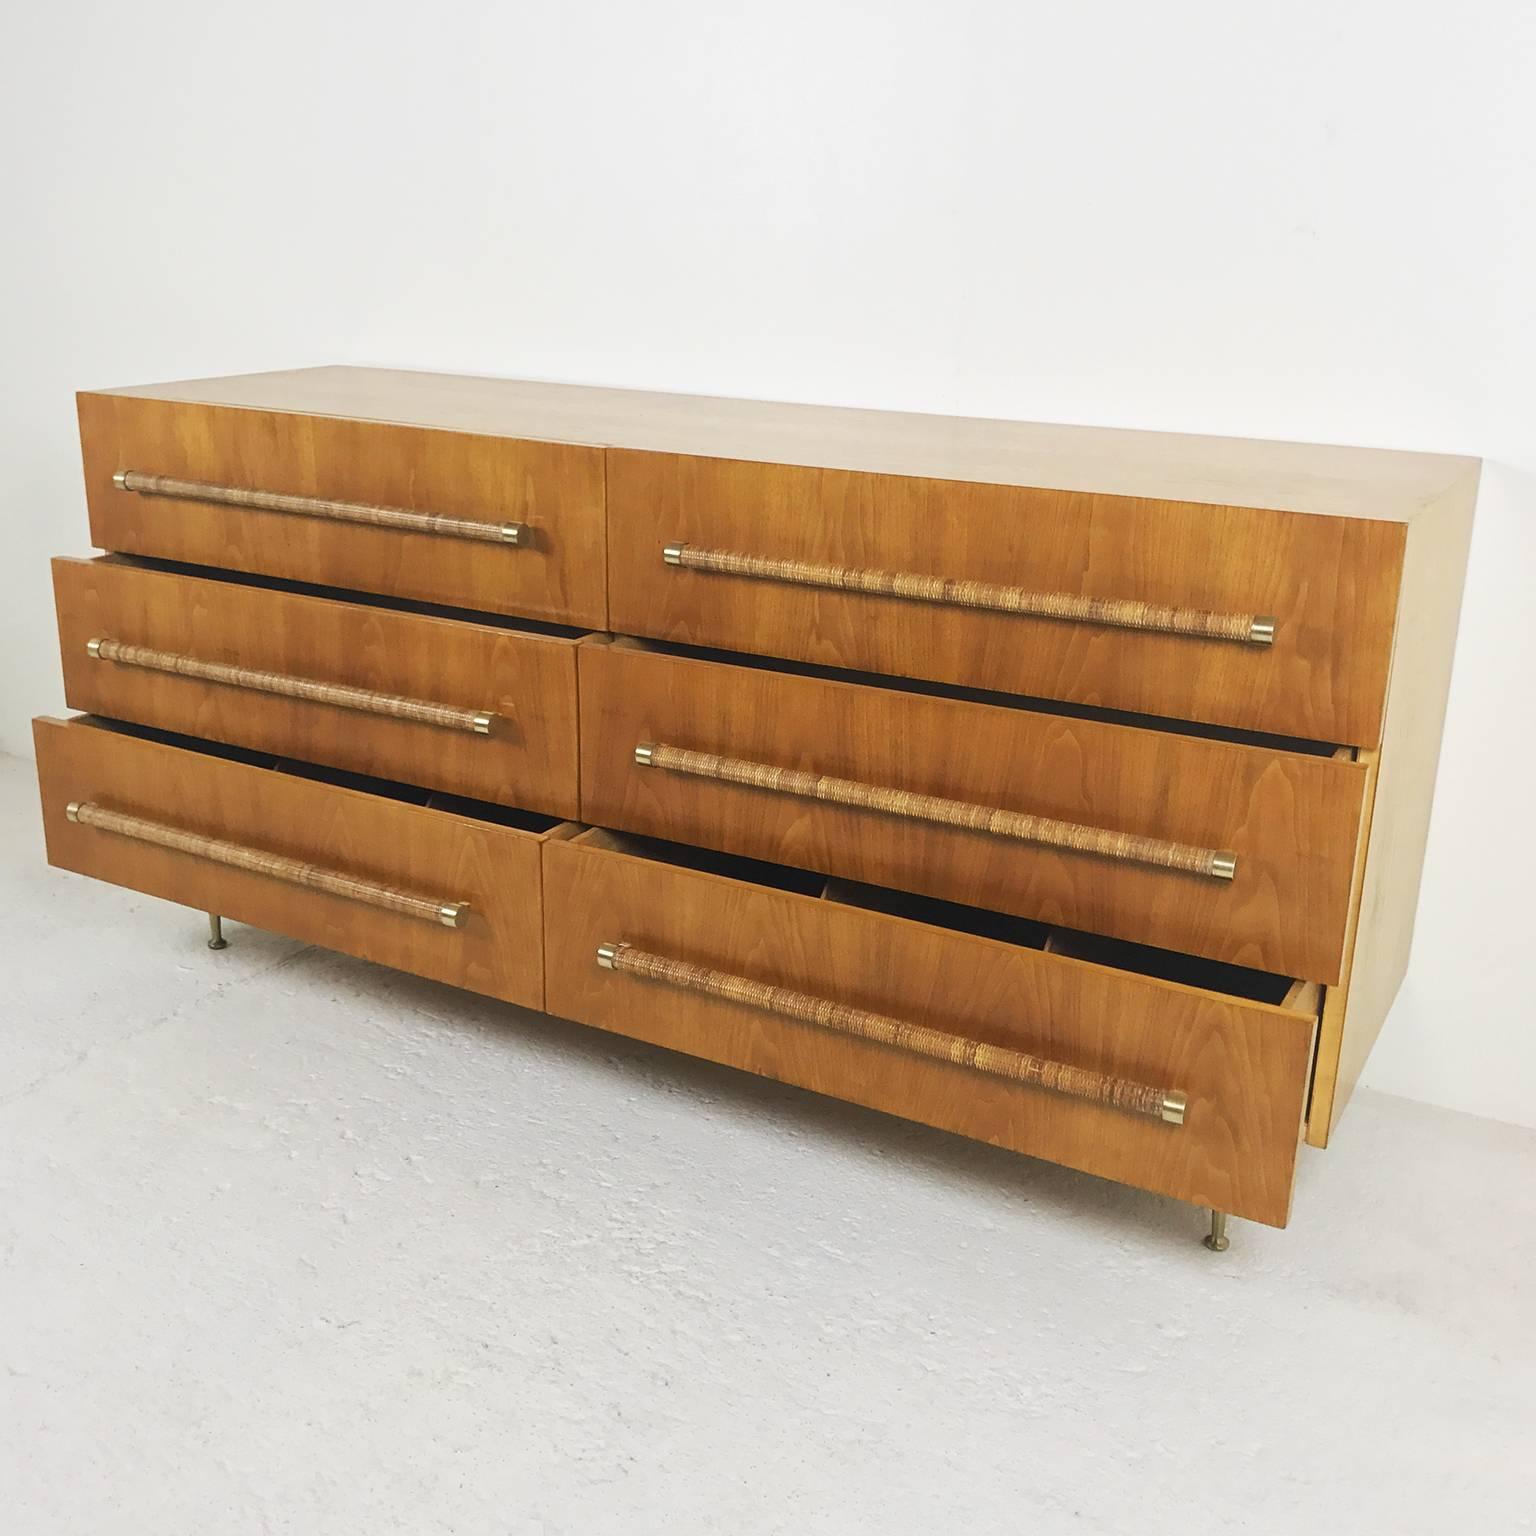 Mid-20th Century Chest of Drawers by Robsjohn-Gibbings for Widdicomb, 1950 For Sale